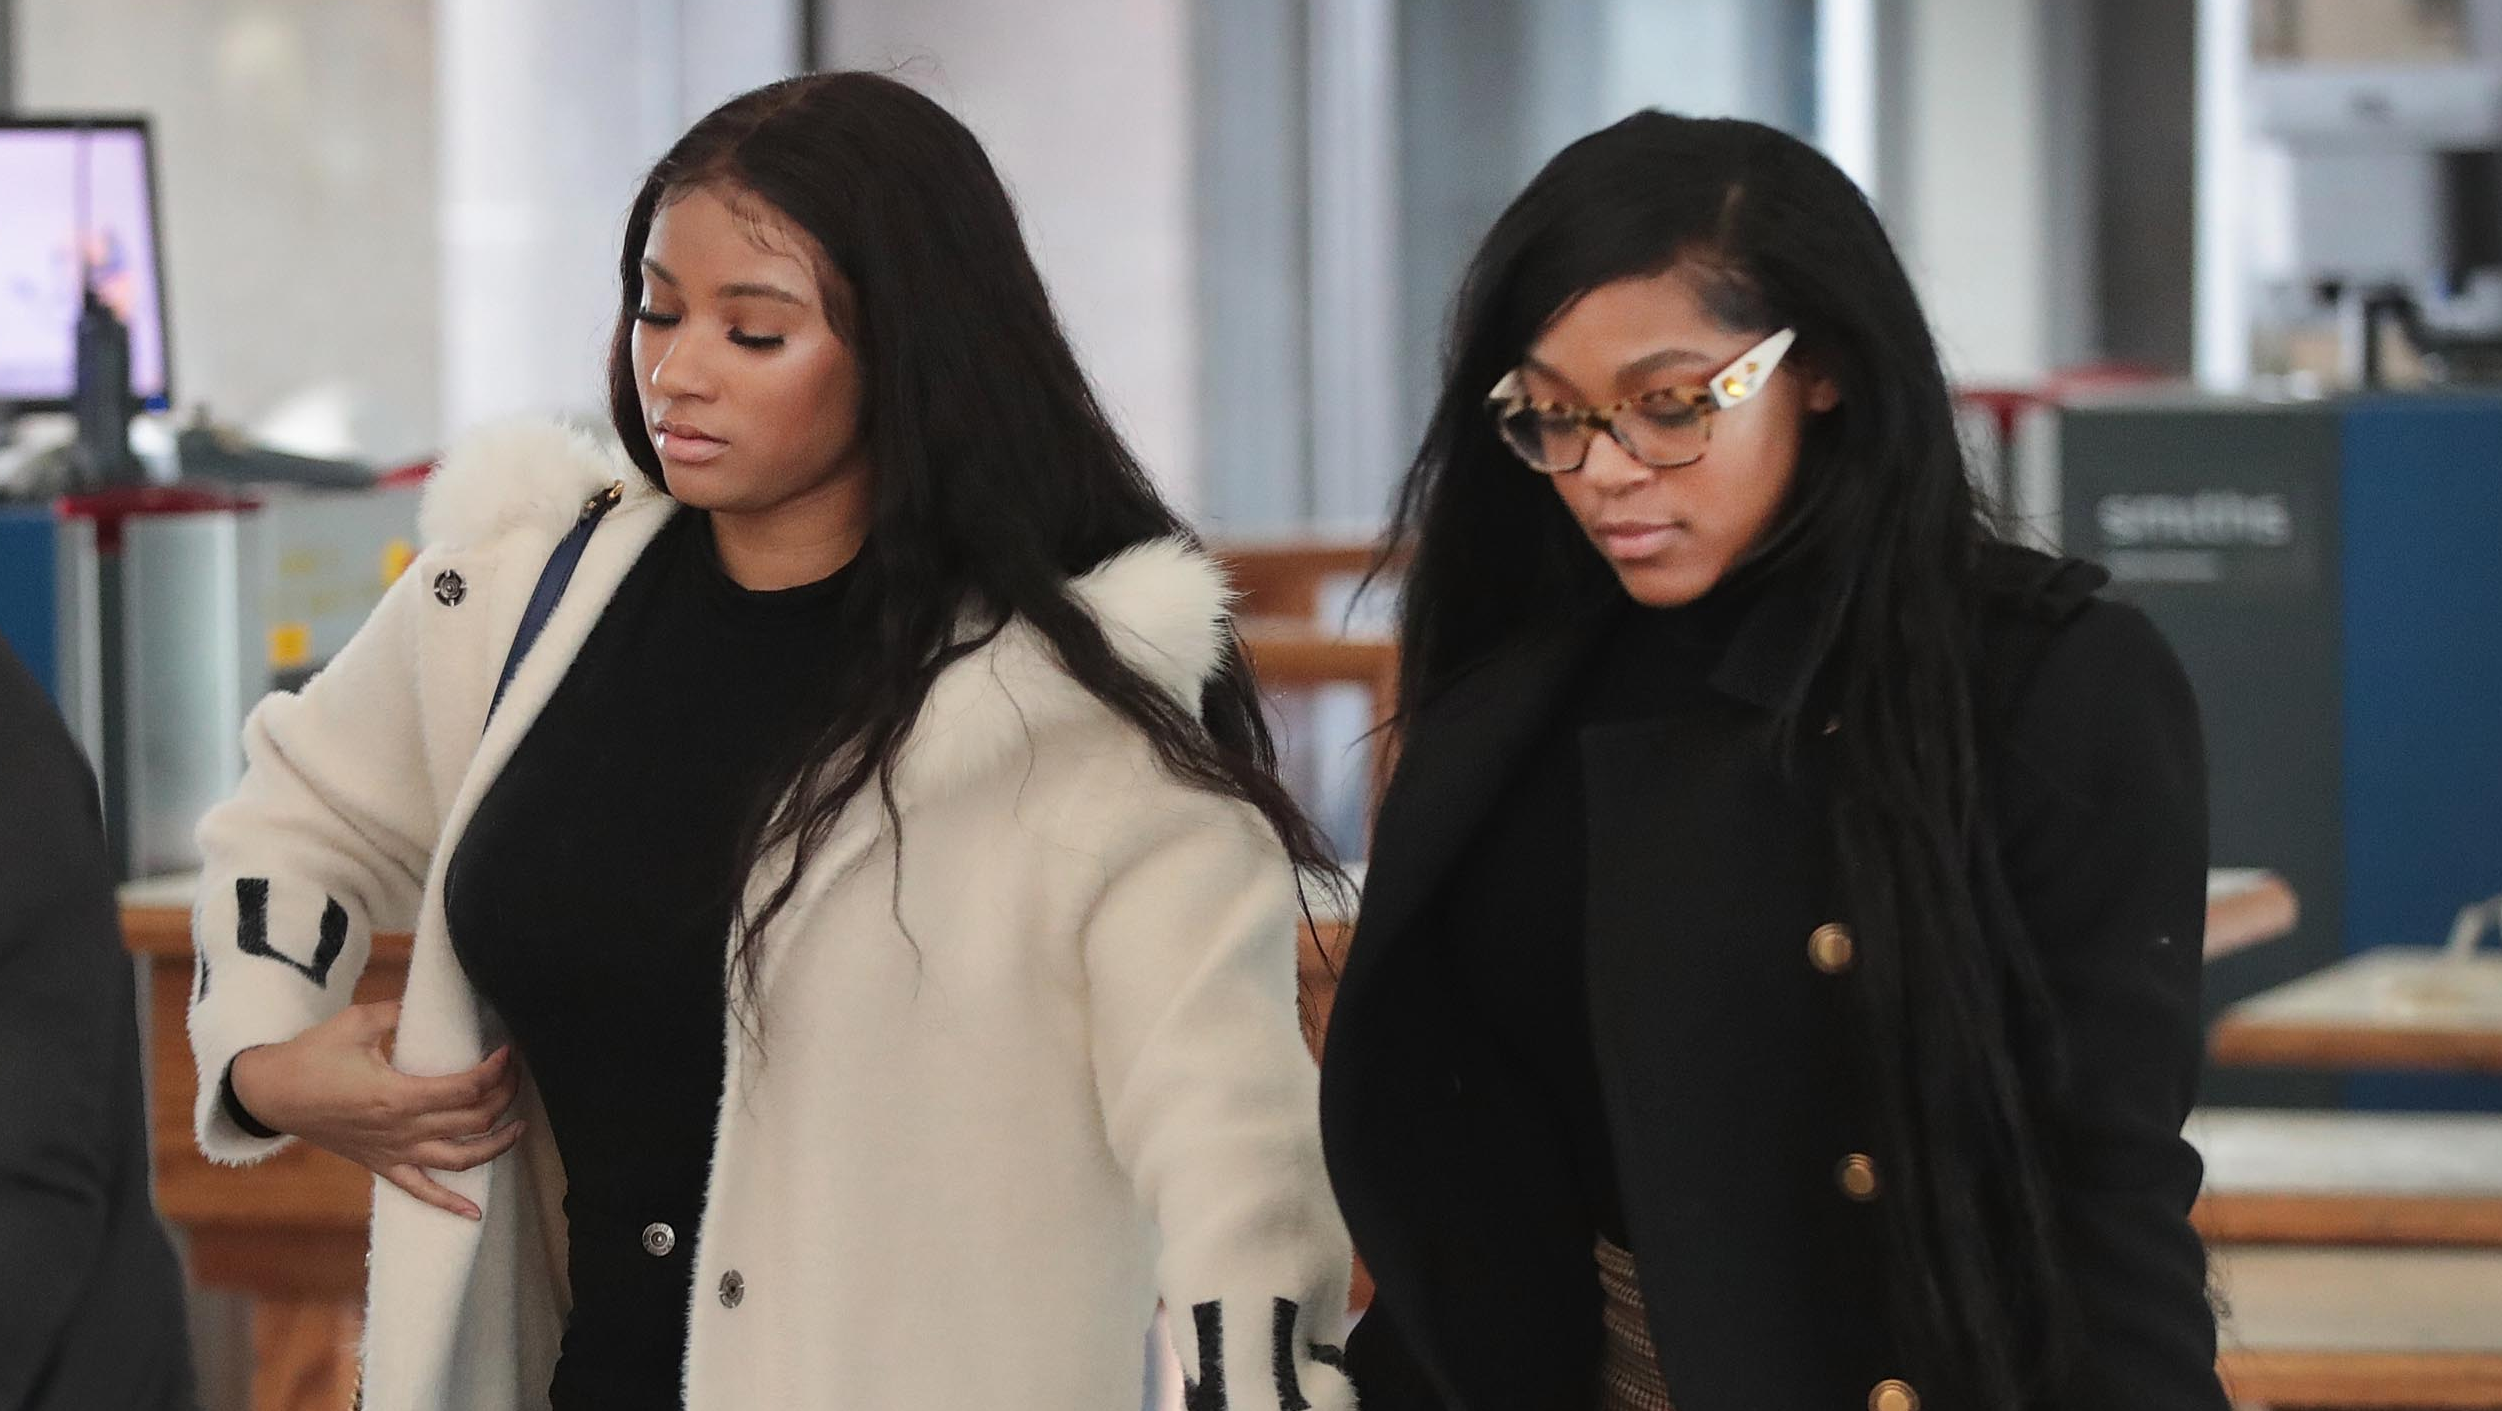 R. Kelly’s Girlfriends Kicked Out of Trump Tower Chicago After Singer’s Arrest